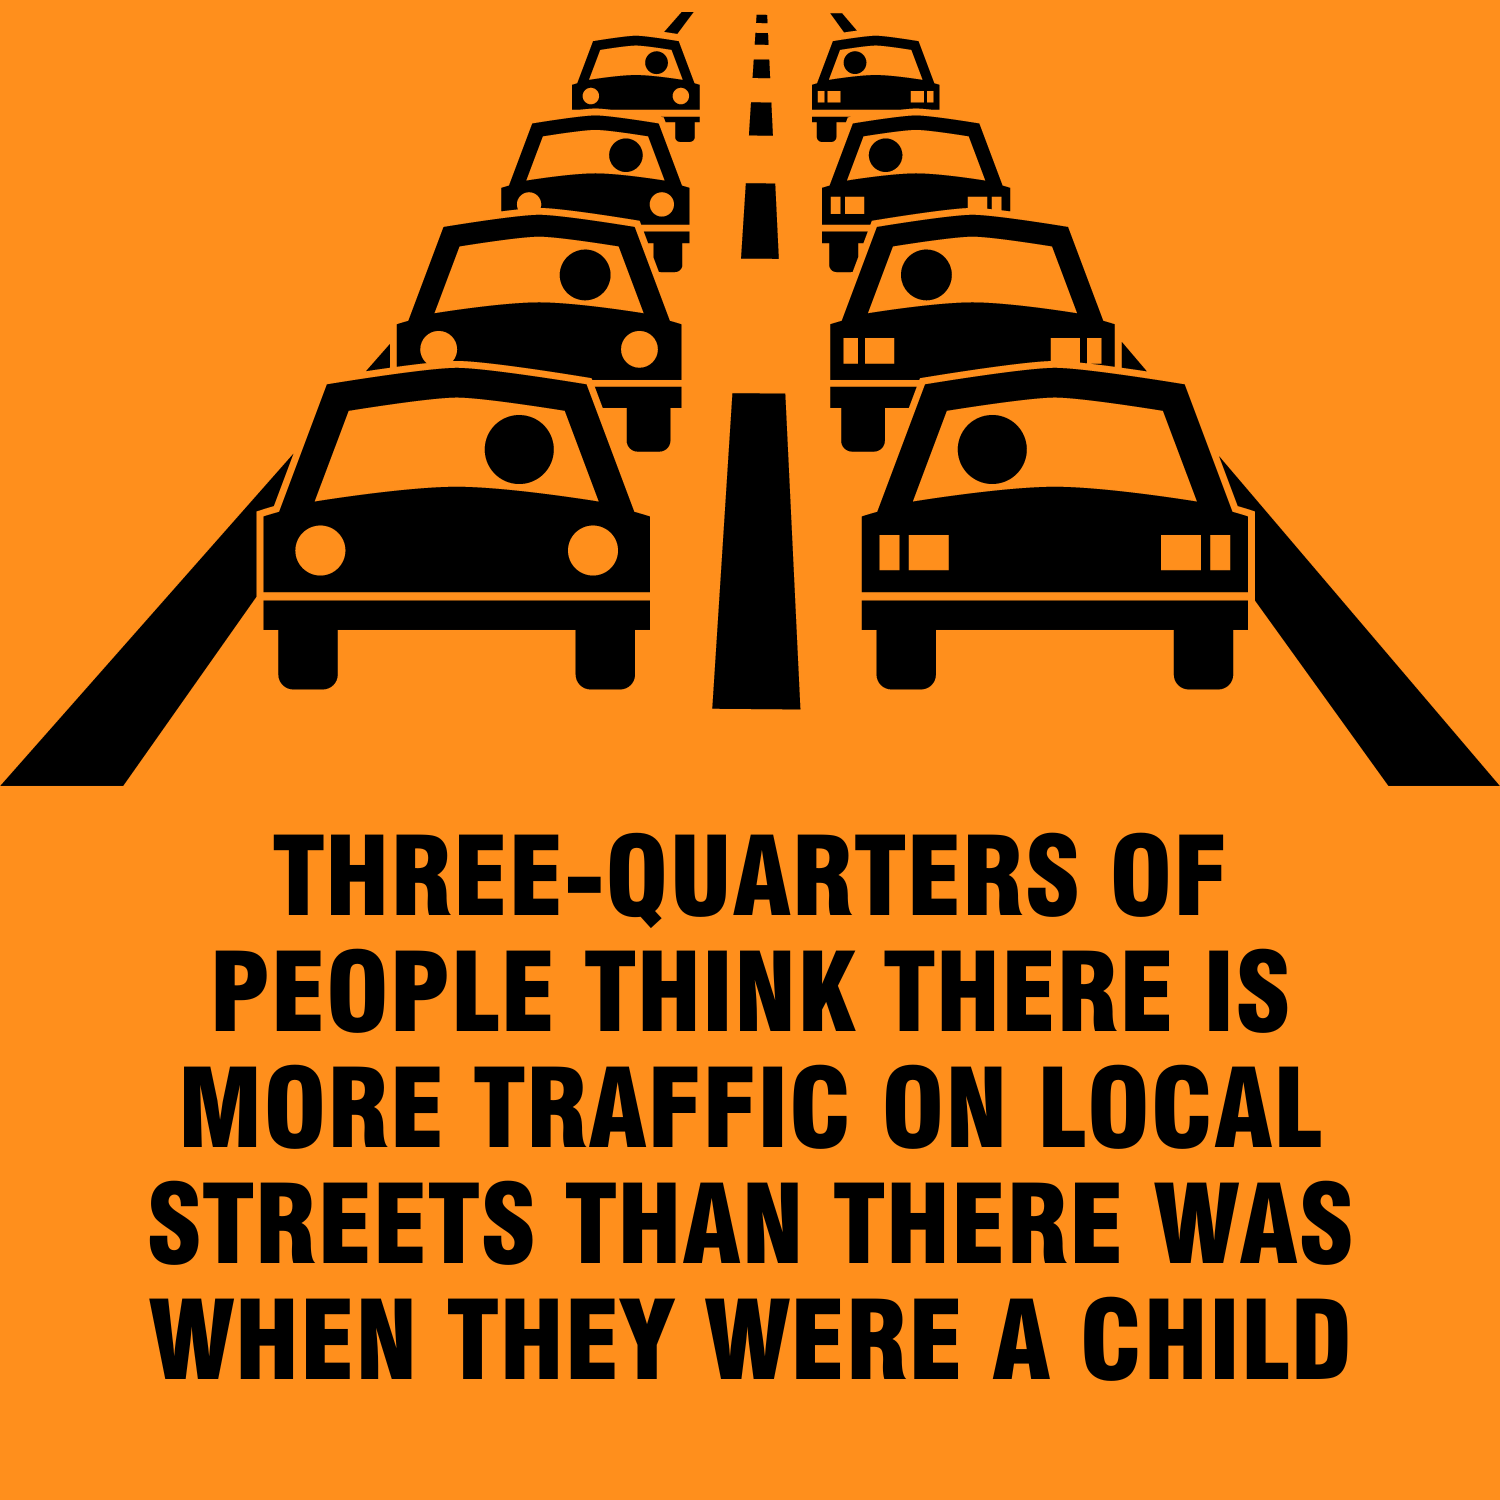 three quarters of people think there is more traffic on local streets than there was when they were a child